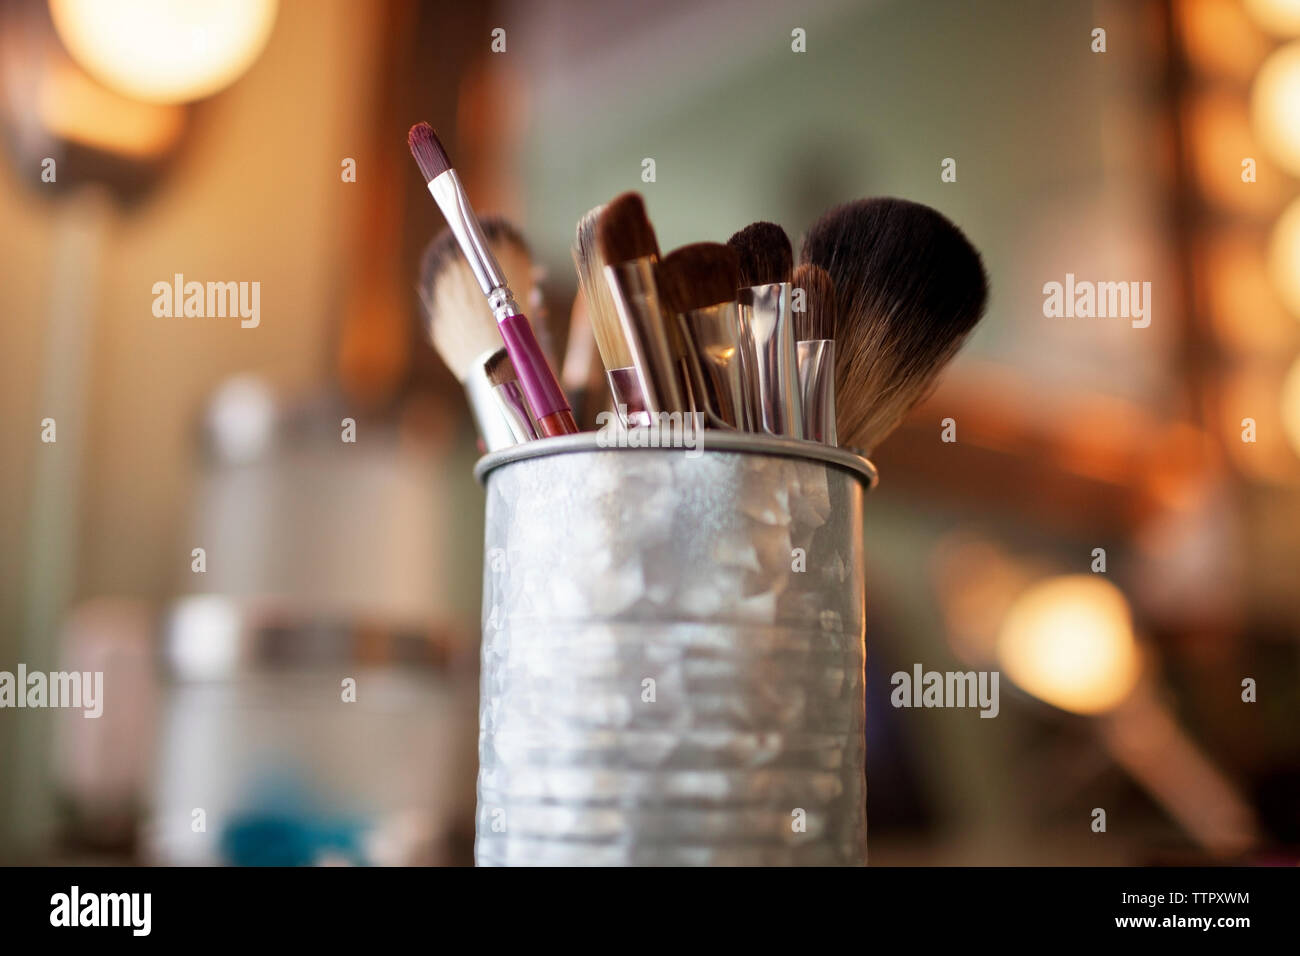 Makeup brushes in container Stock Photo